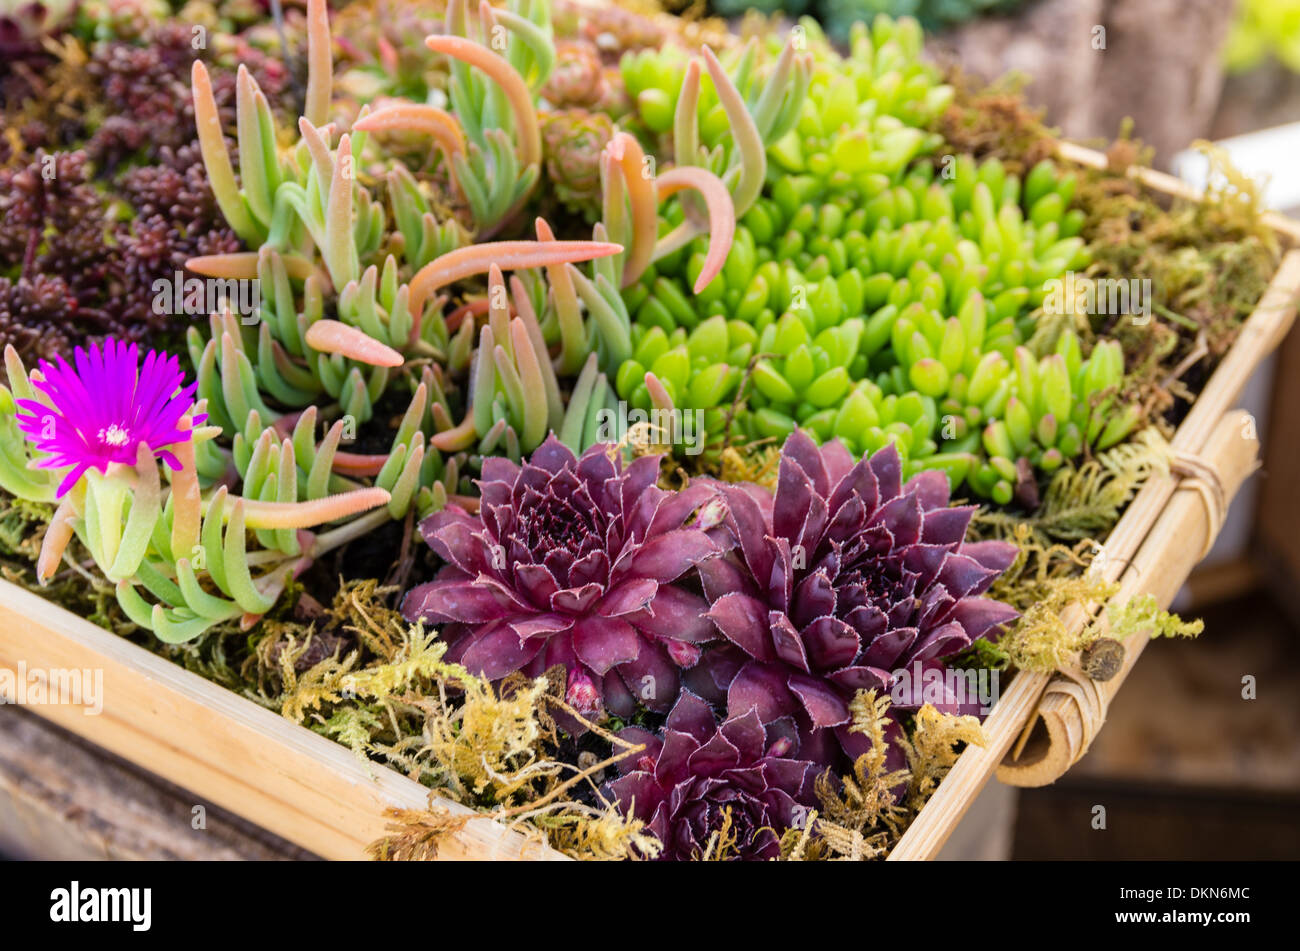 Sedum and sempervivium plants suitable for green roof applications Stock Photo